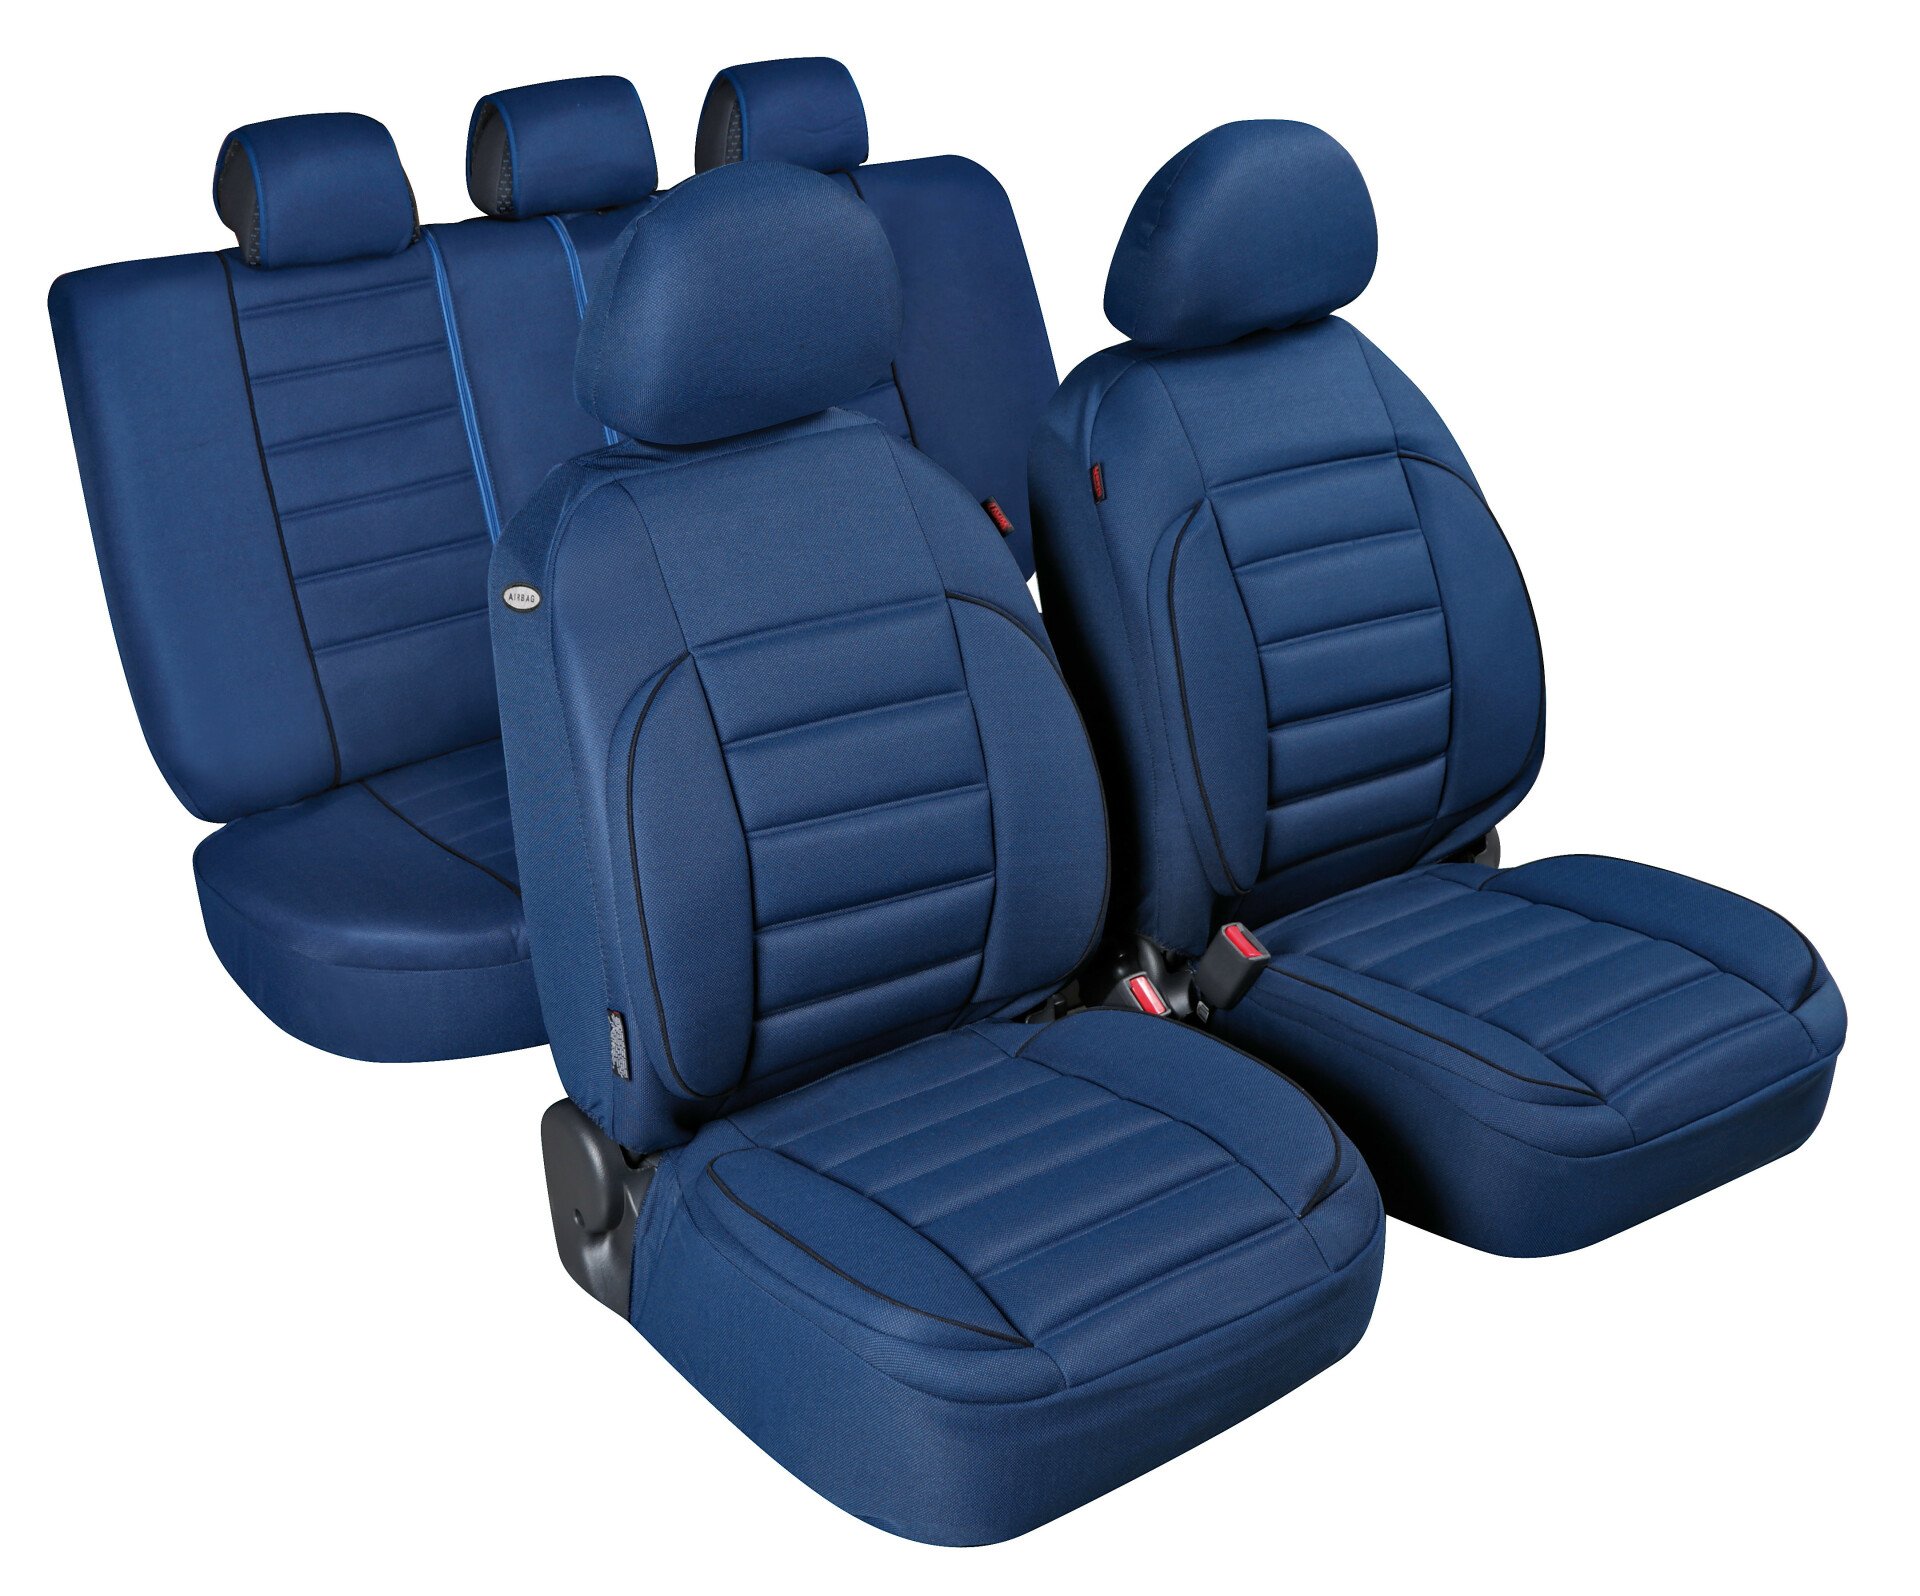 De-Luxe Sport Edition, high-quality seat cover set - Blue thumb